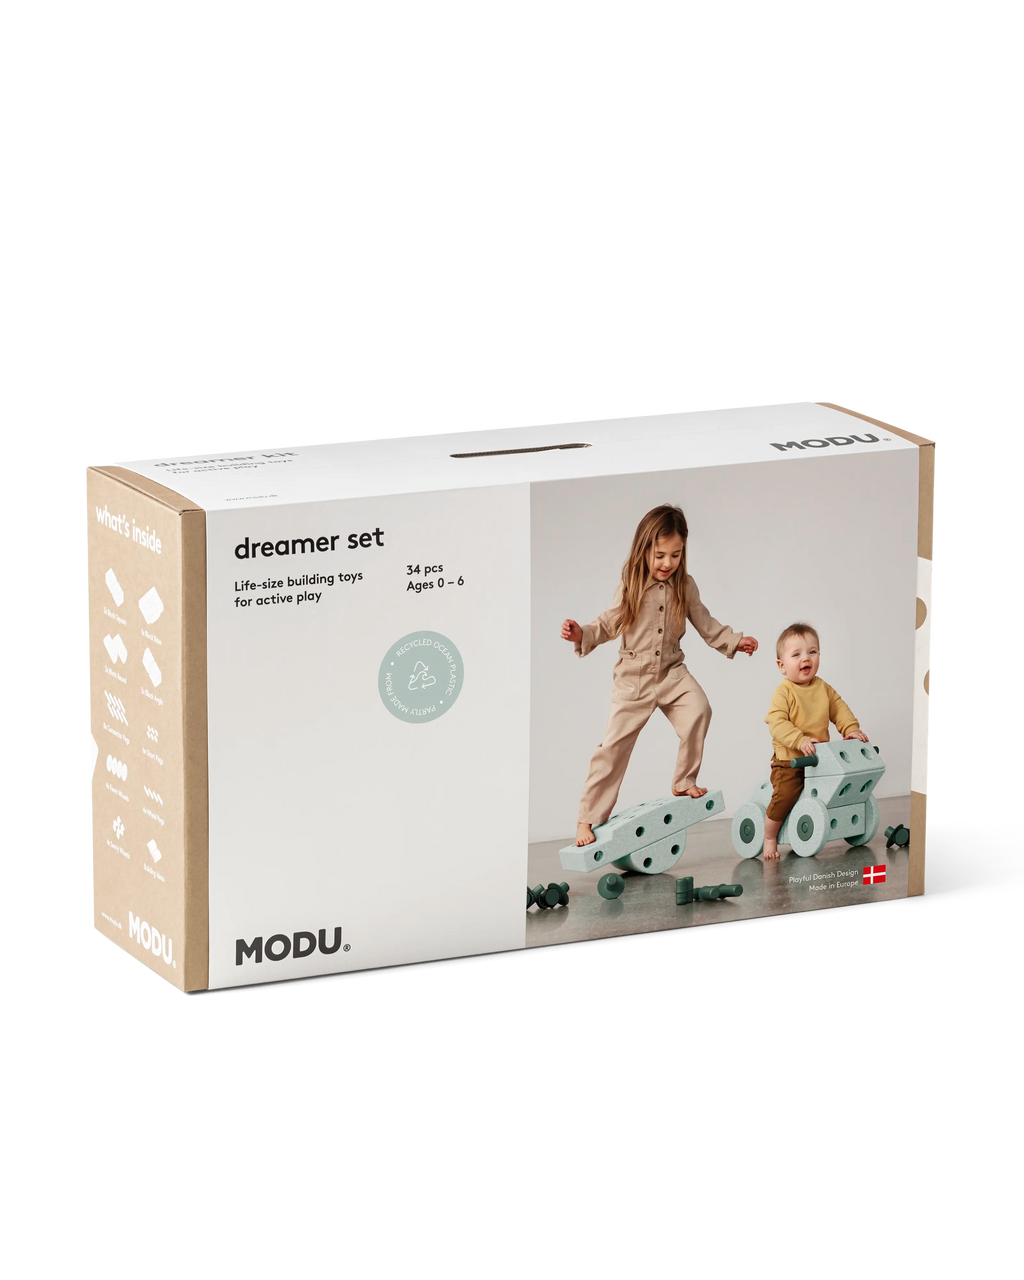 MODU Dreamer Set in Ocean Mint Forest Green. Life-sized building toy for active play.